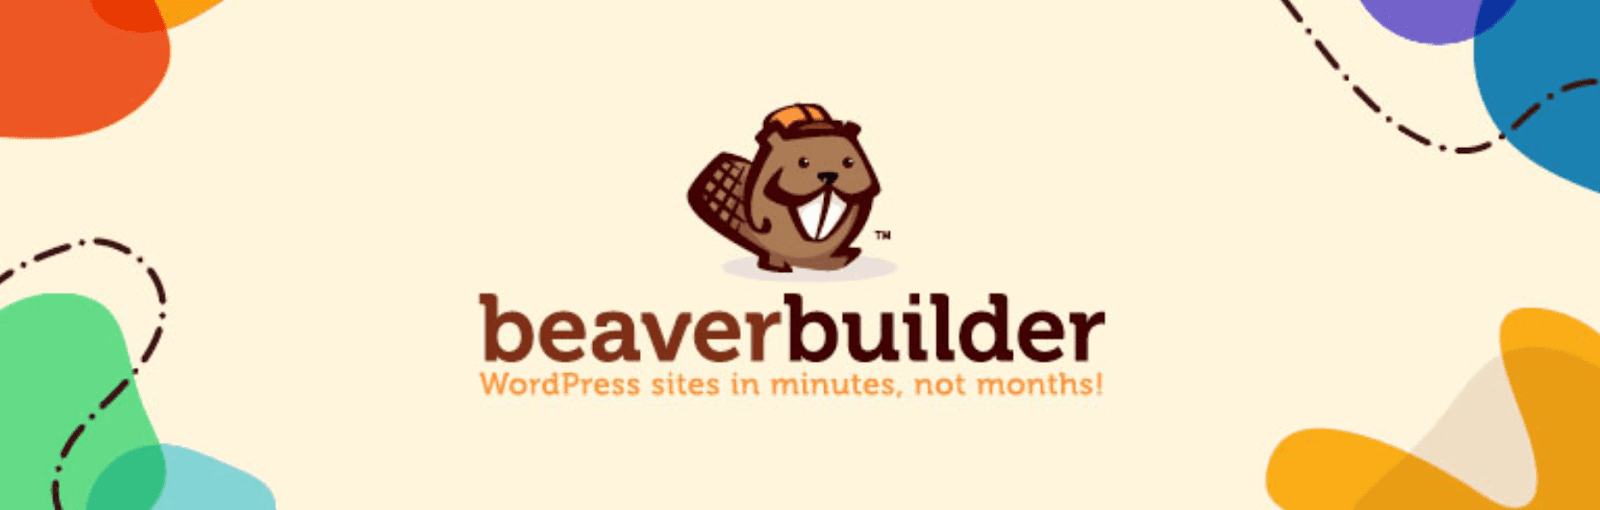 The WordPress plugin Beaver Builder can help you create pages for your WooCommerce store.